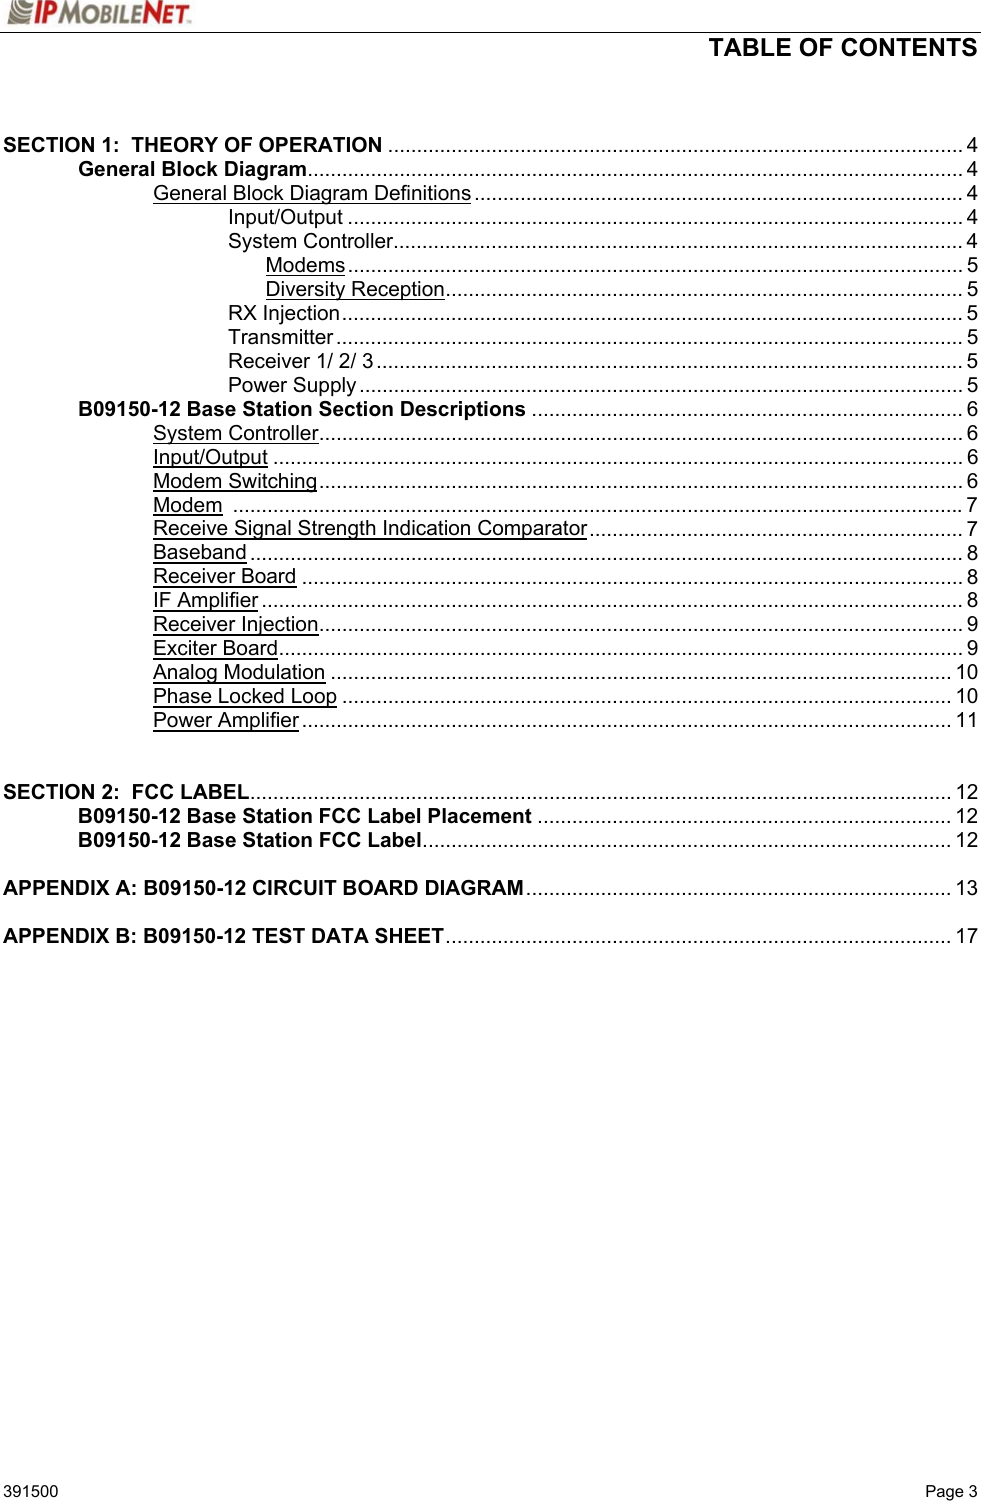  TABLE OF CONTENTS   391500   Page 3  SECTION 1:  THEORY OF OPERATION .................................................................................................... 4   General Block Diagram.................................................................................................................. 4     General Block Diagram Definitions..................................................................................... 4    Input/Output ........................................................................................................... 4    System Controller................................................................................................... 4     Modems........................................................................................................... 5     Diversity Reception.......................................................................................... 5    RX Injection............................................................................................................ 5    Transmitter ............................................................................................................. 5    Receiver 1/ 2/ 3...................................................................................................... 5    Power Supply......................................................................................................... 5  B09150-12 Base Station Section Descriptions ........................................................................... 6   System Controller................................................................................................................ 6   Input/Output ........................................................................................................................ 6   Modem Switching................................................................................................................ 6   Modem ...............................................................................................................................7     Receive Signal Strength Indication Comparator................................................................. 7   Baseband ............................................................................................................................ 8   Receiver Board ................................................................................................................... 8   IF Amplifier .......................................................................................................................... 8   Receiver Injection................................................................................................................ 9   Exciter Board....................................................................................................................... 9   Analog Modulation ............................................................................................................ 10   Phase Locked Loop .......................................................................................................... 10   Power Amplifier................................................................................................................. 11   SECTION 2:  FCC LABEL.......................................................................................................................... 12  B09150-12 Base Station FCC Label Placement ........................................................................ 12  B09150-12 Base Station FCC Label............................................................................................ 12  APPENDIX A: B09150-12 CIRCUIT BOARD DIAGRAM.......................................................................... 13  APPENDIX B: B09150-12 TEST DATA SHEET........................................................................................ 17     